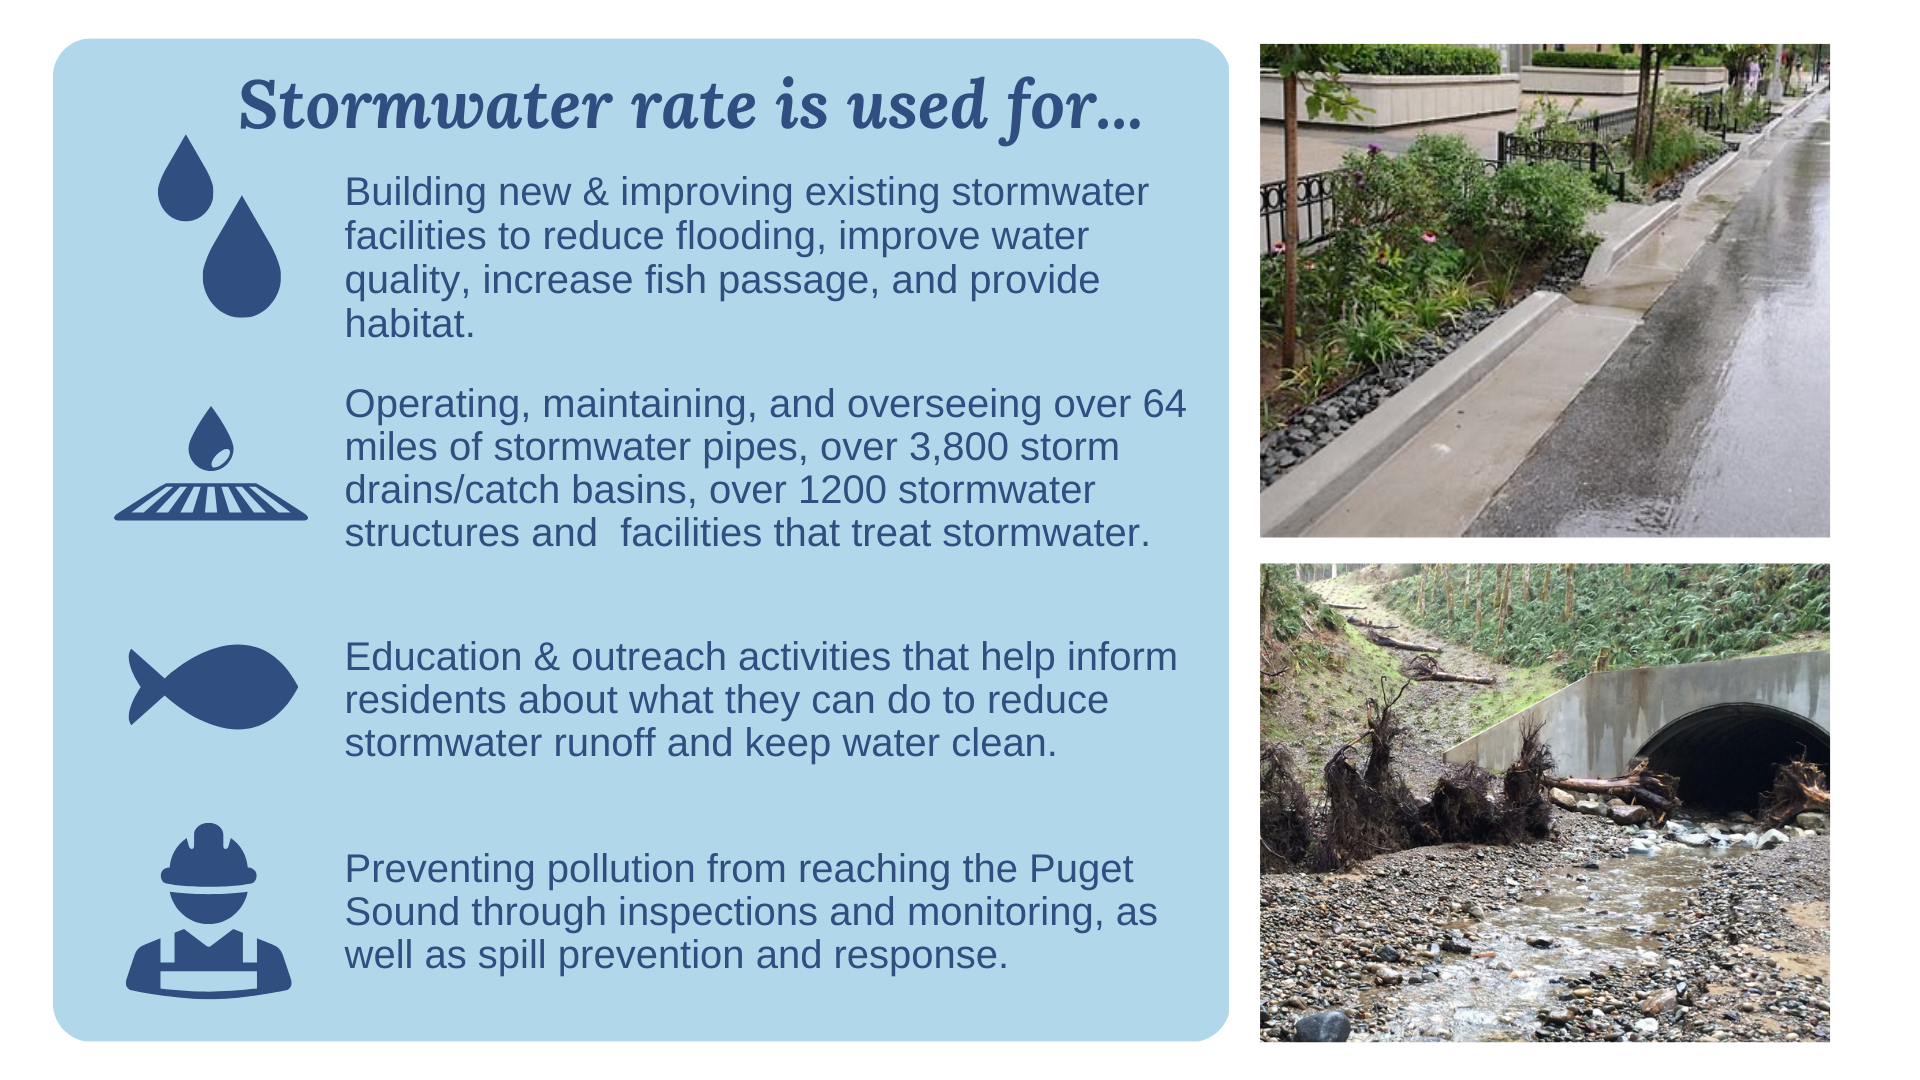 Stormwater rates image page 2